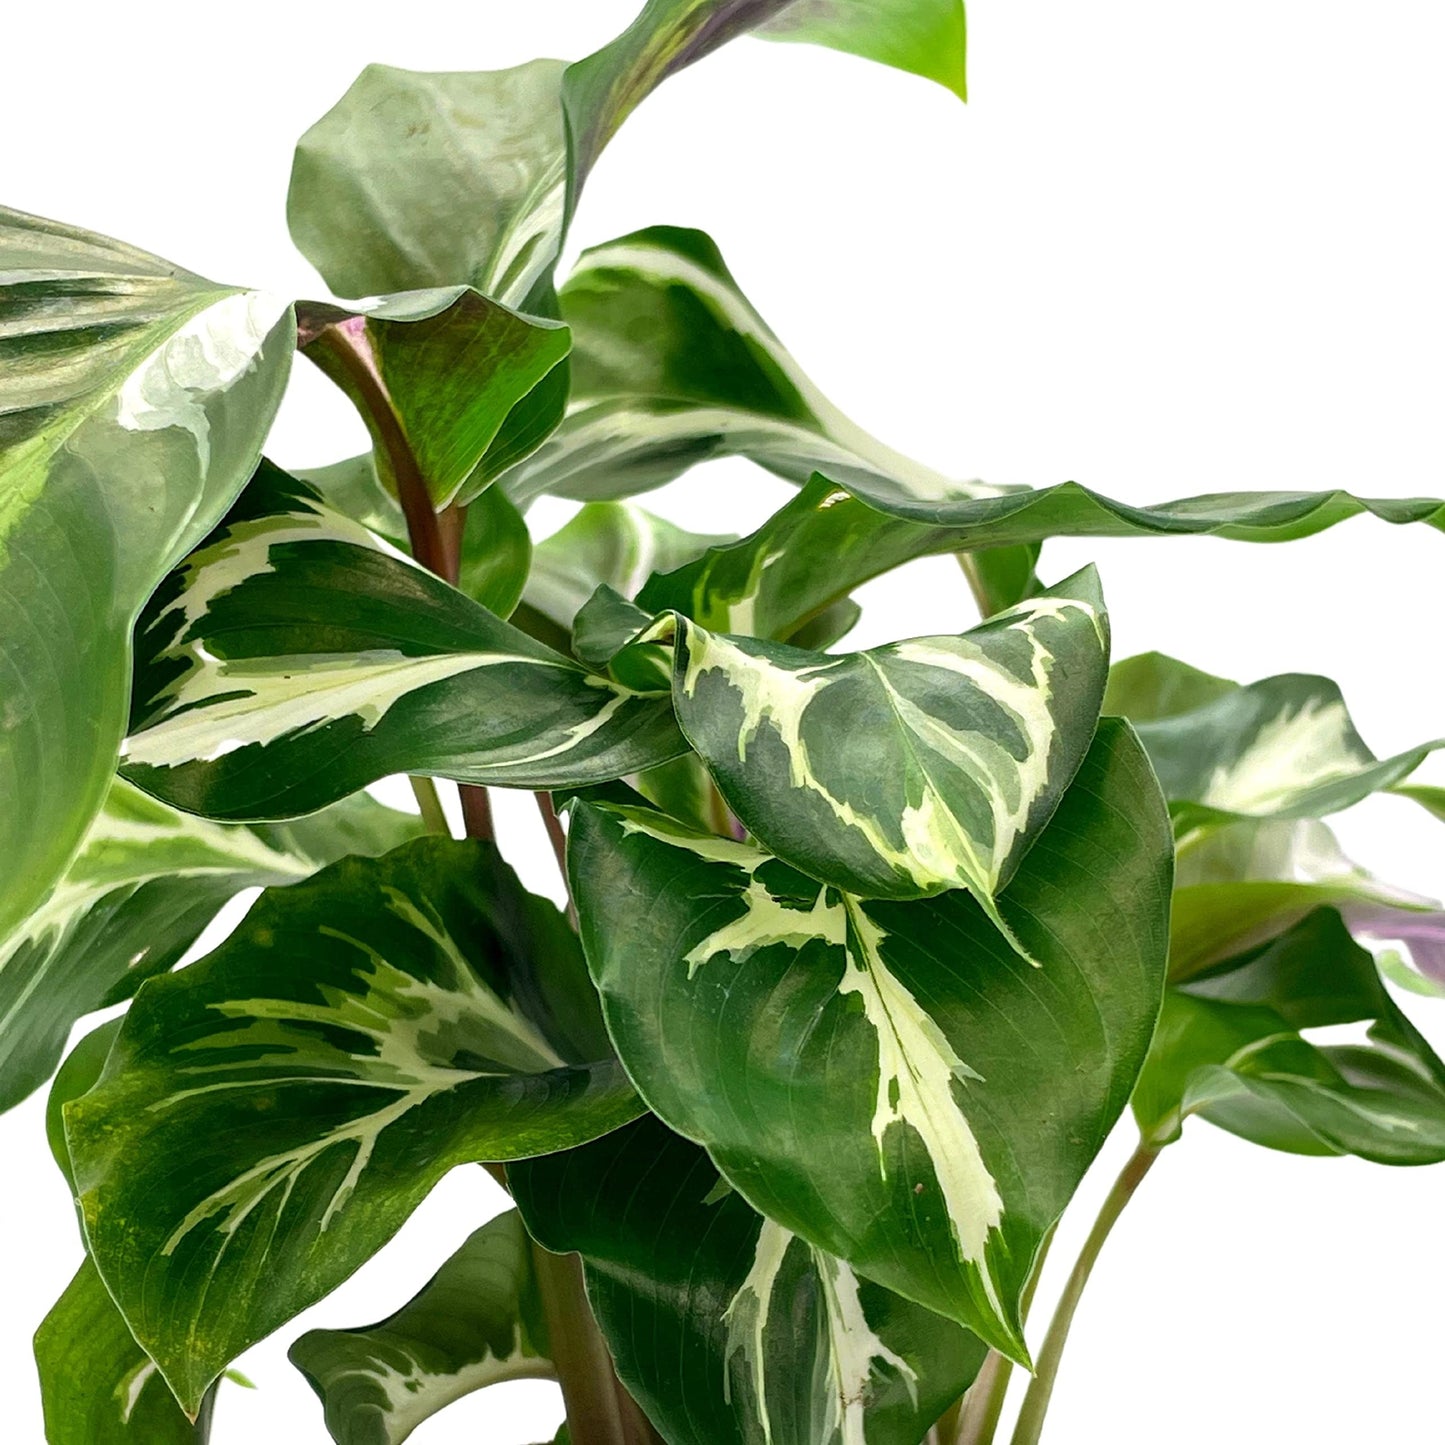 Calathea White Fusion, 4 inch, Rare Variegated Prayer Plant, Cathedral Plant, Green and White